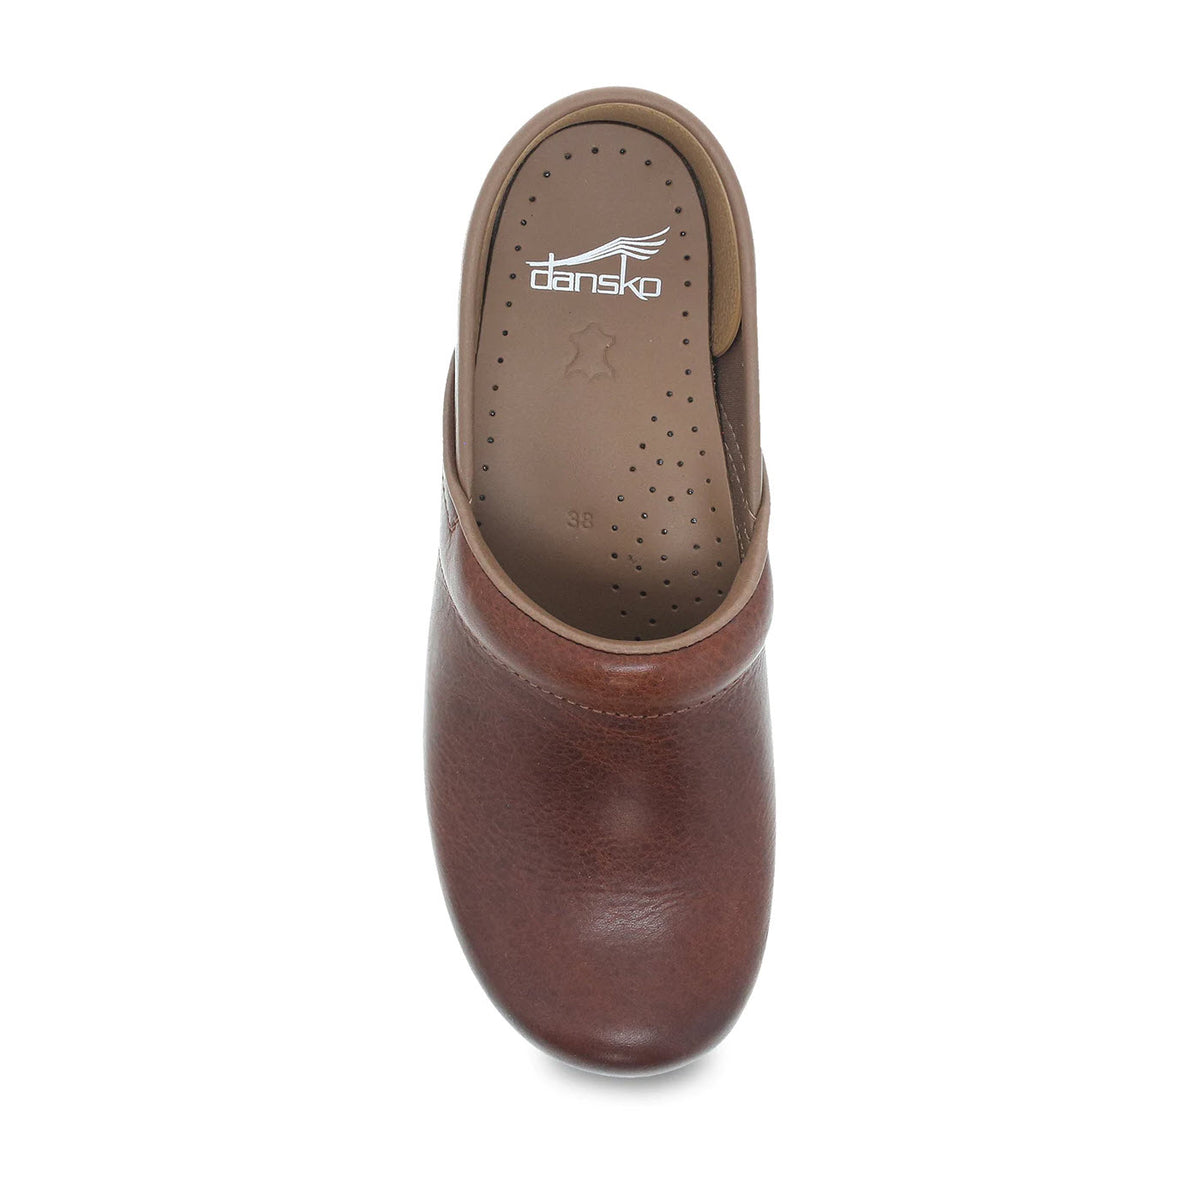 Top view of a single brown Dansko Professional clog showing the brand label inside the shoe.